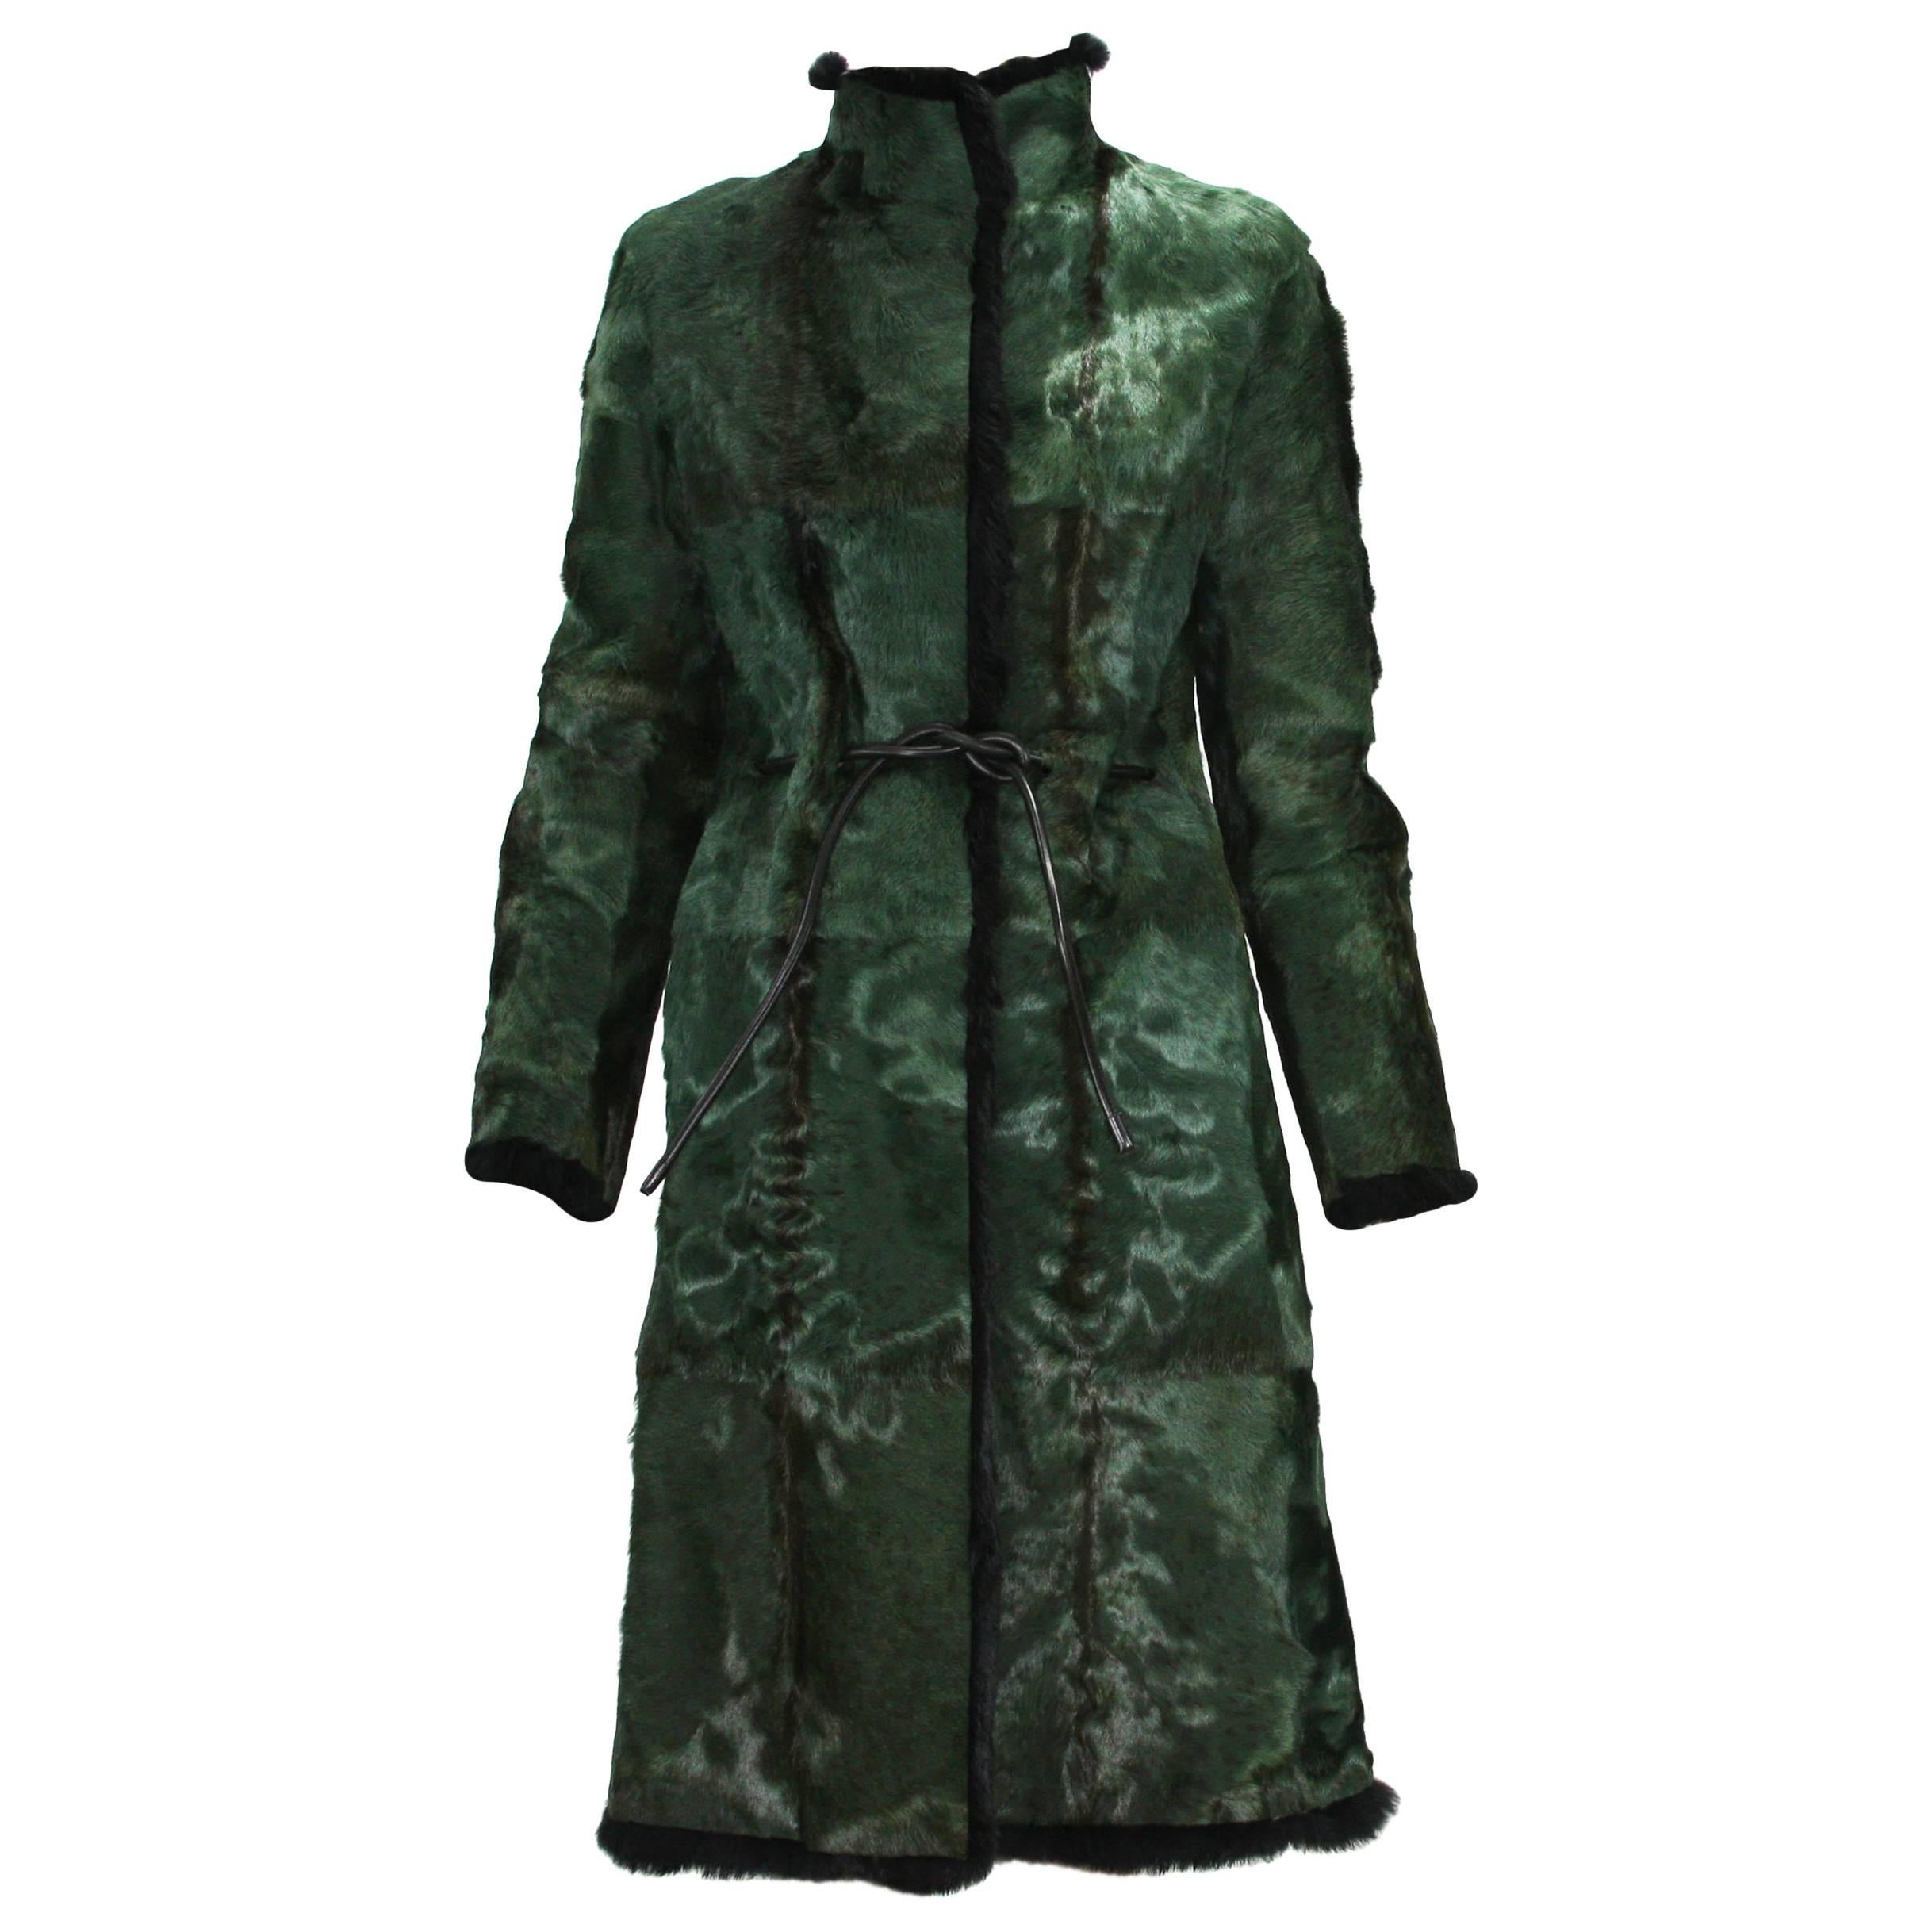 Tom Ford for Gucci 1999 Collection Reversible Emerald Green Fur Coat It. 40 For Sale